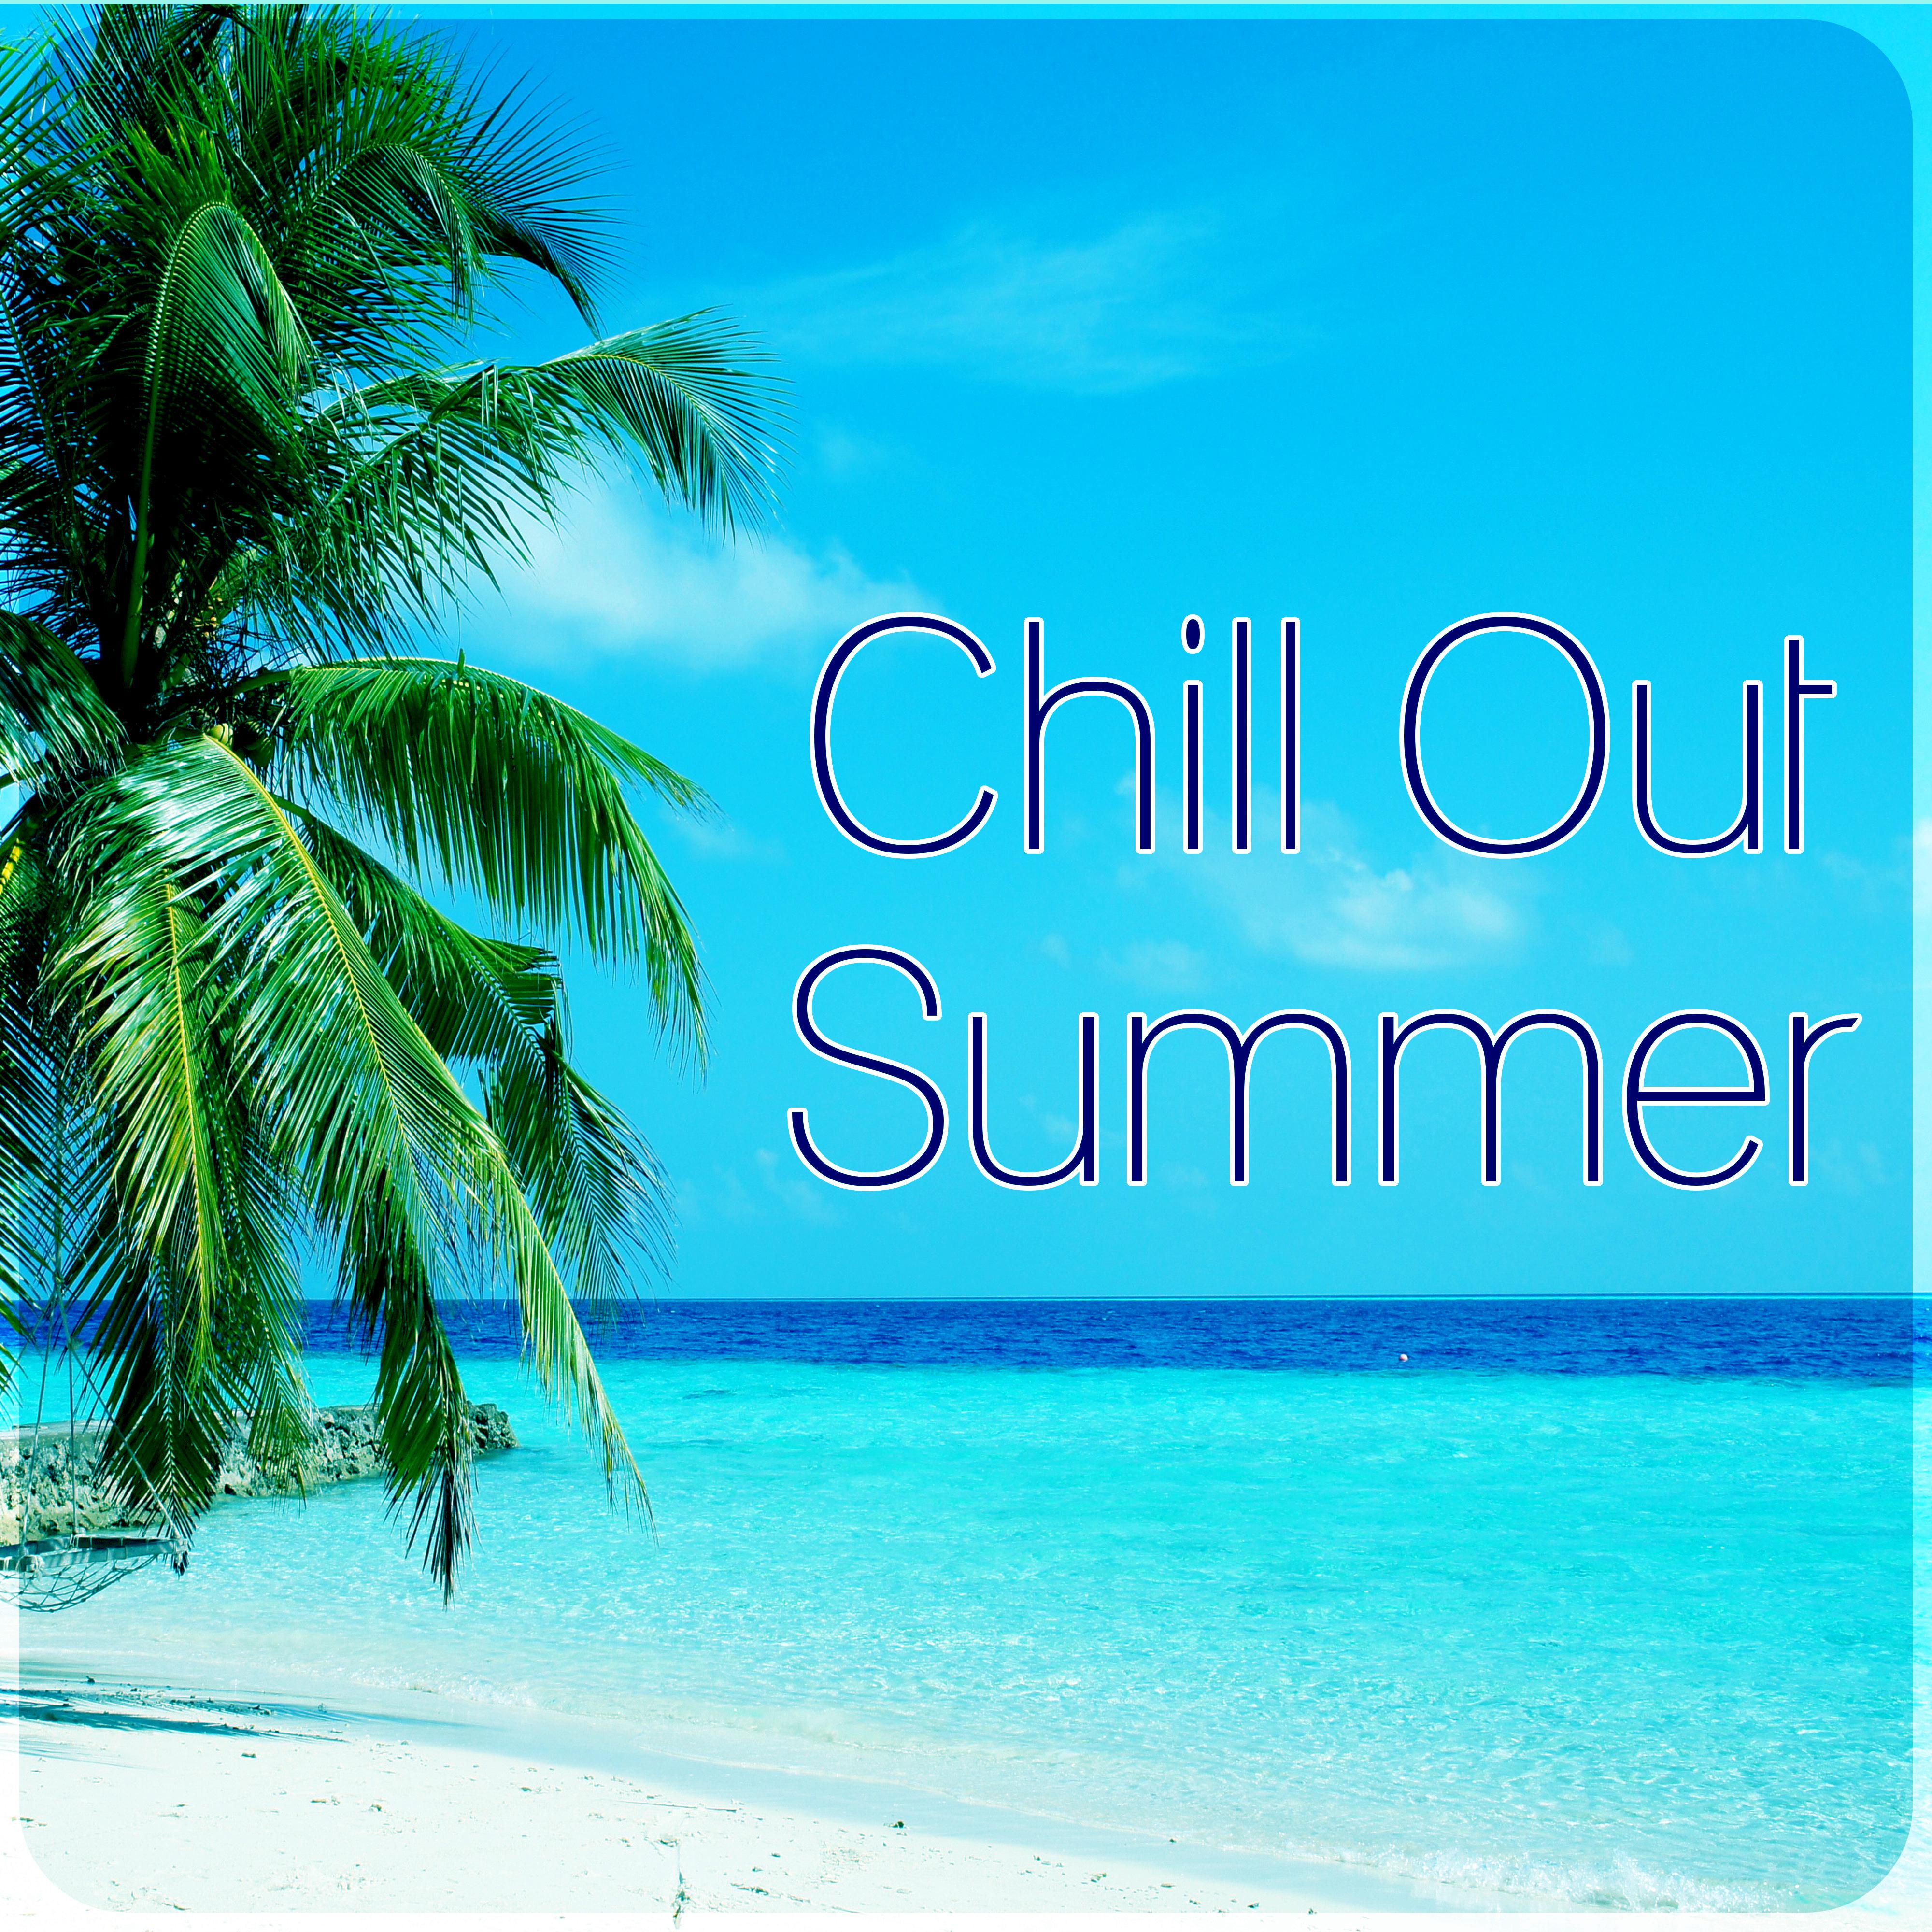 Chill Out Summer – Chill Out Music, Sunny Day, Holidays Under the Palms, By the Seaside, Sunset Lounge, Ocean Dreams, Chill Out Lounge Summer, Step by Step Toward the Sun